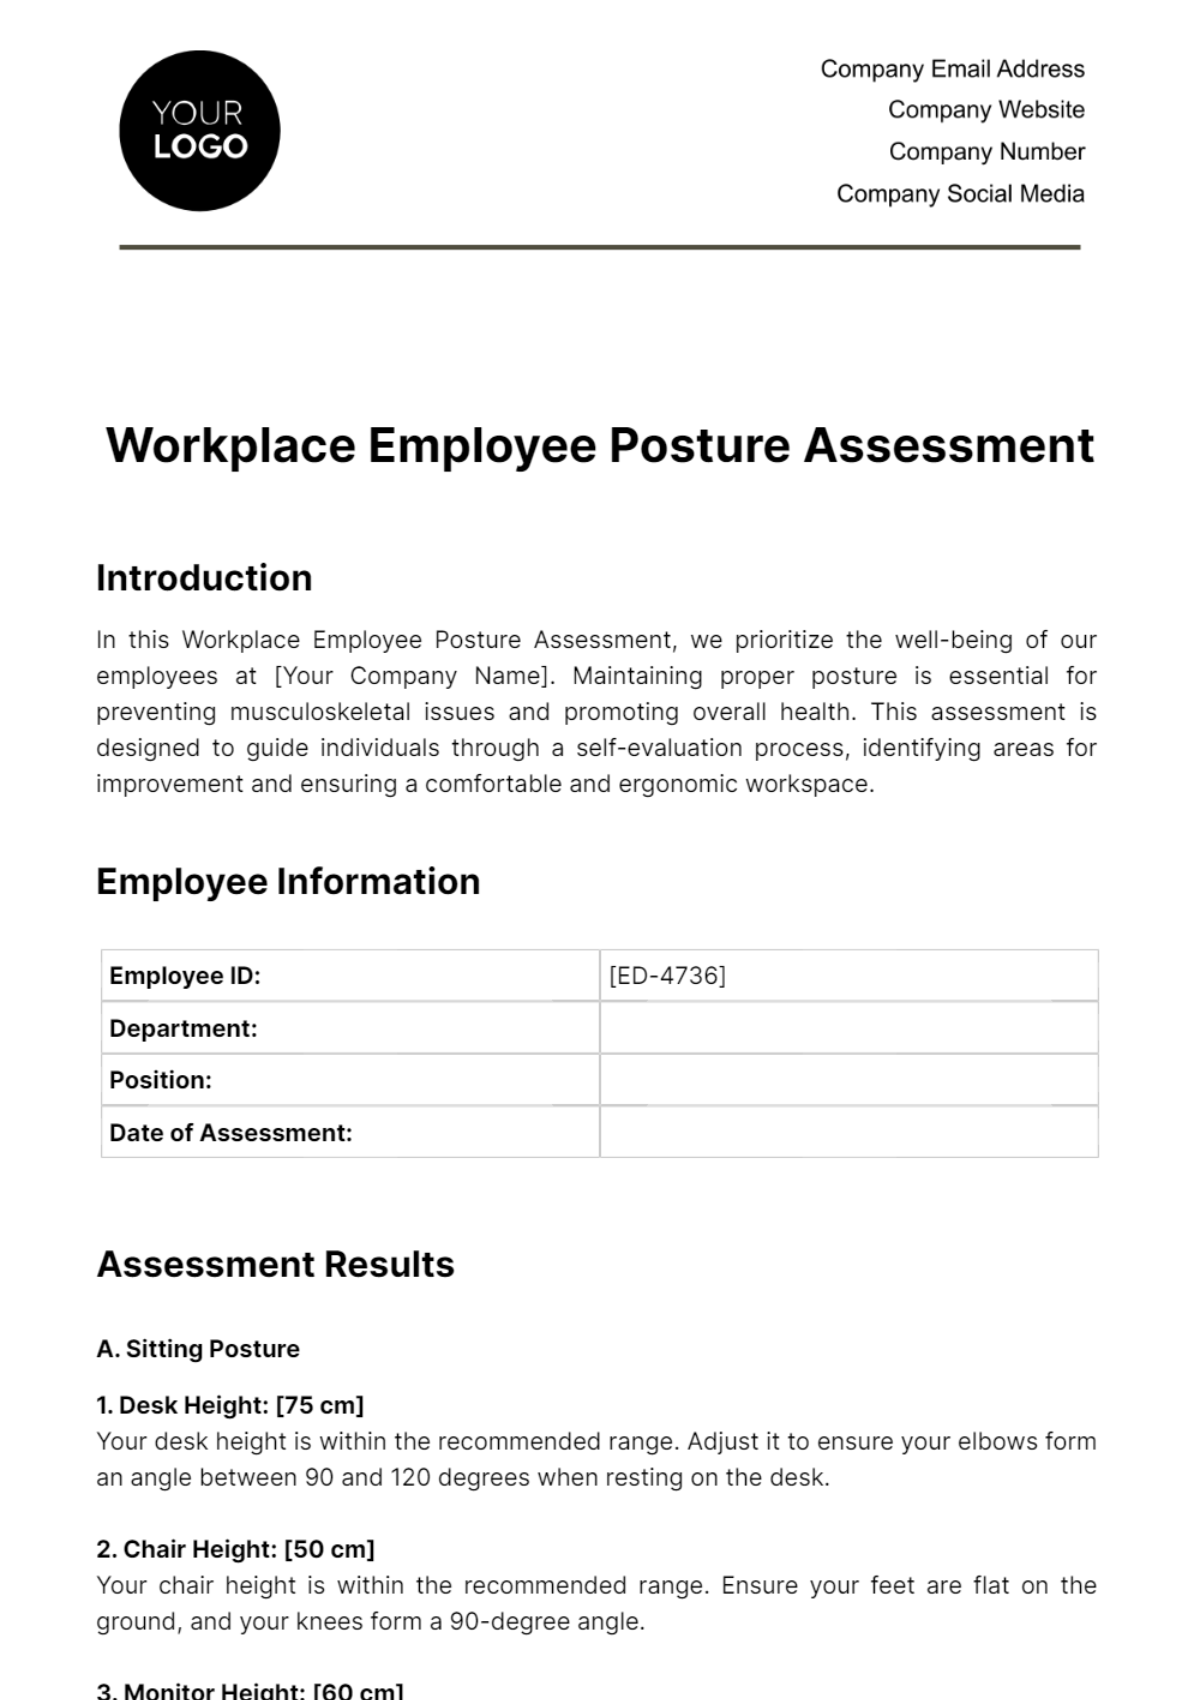 Free Workplace Employee Posture Assessment Template